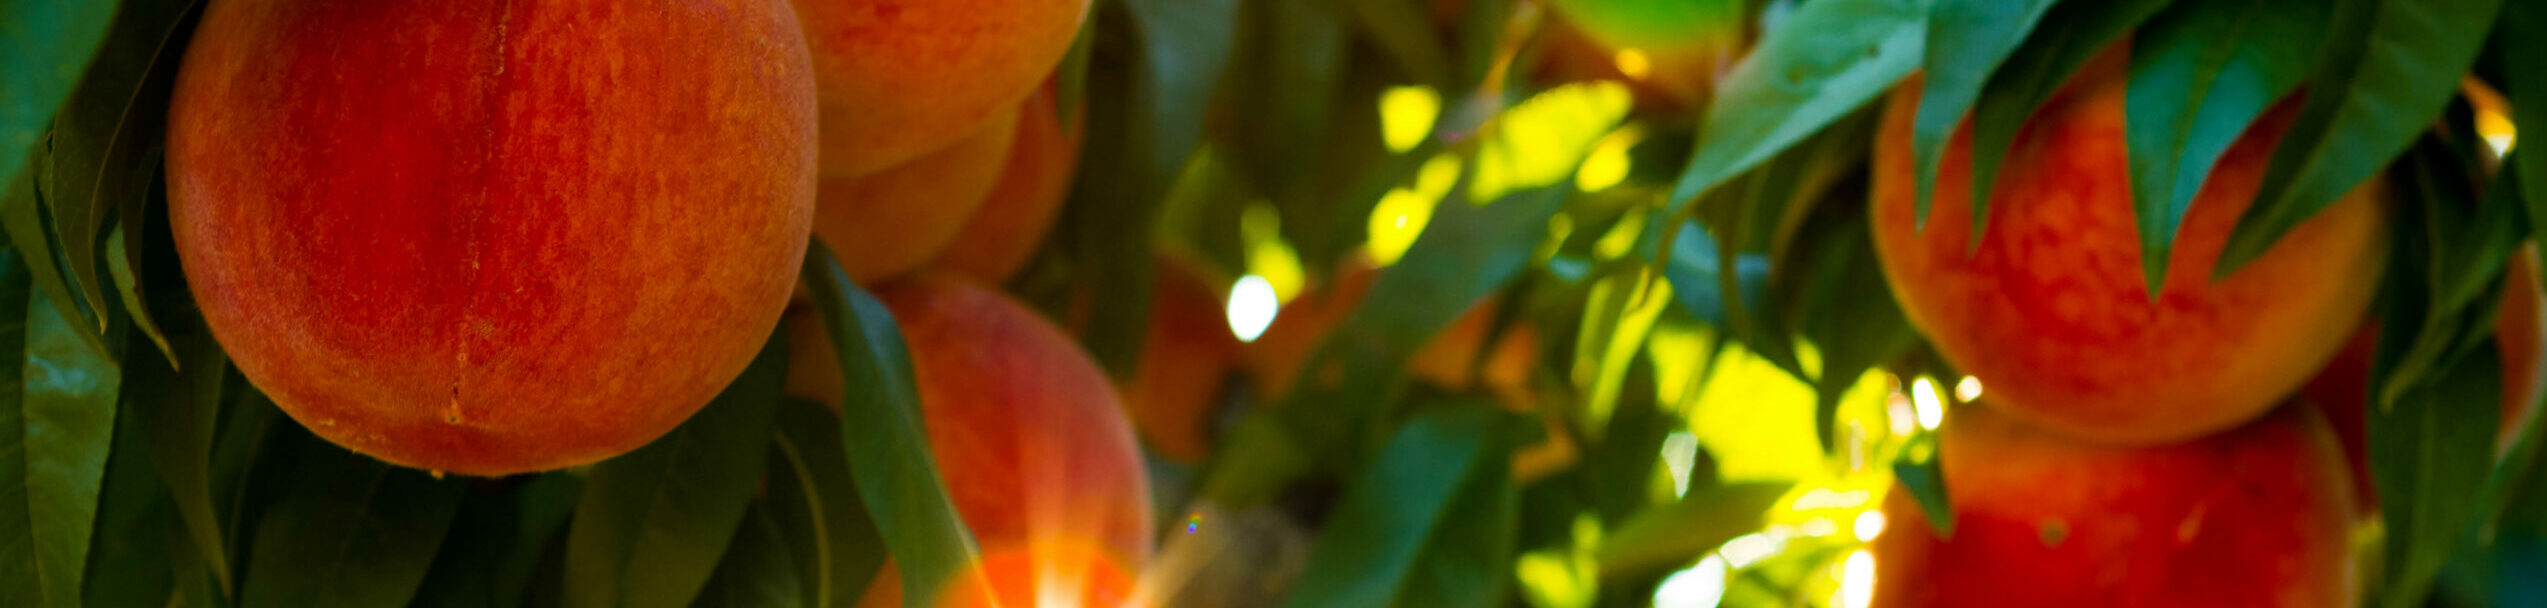 Juicy red peaches on the tree in an orchard.